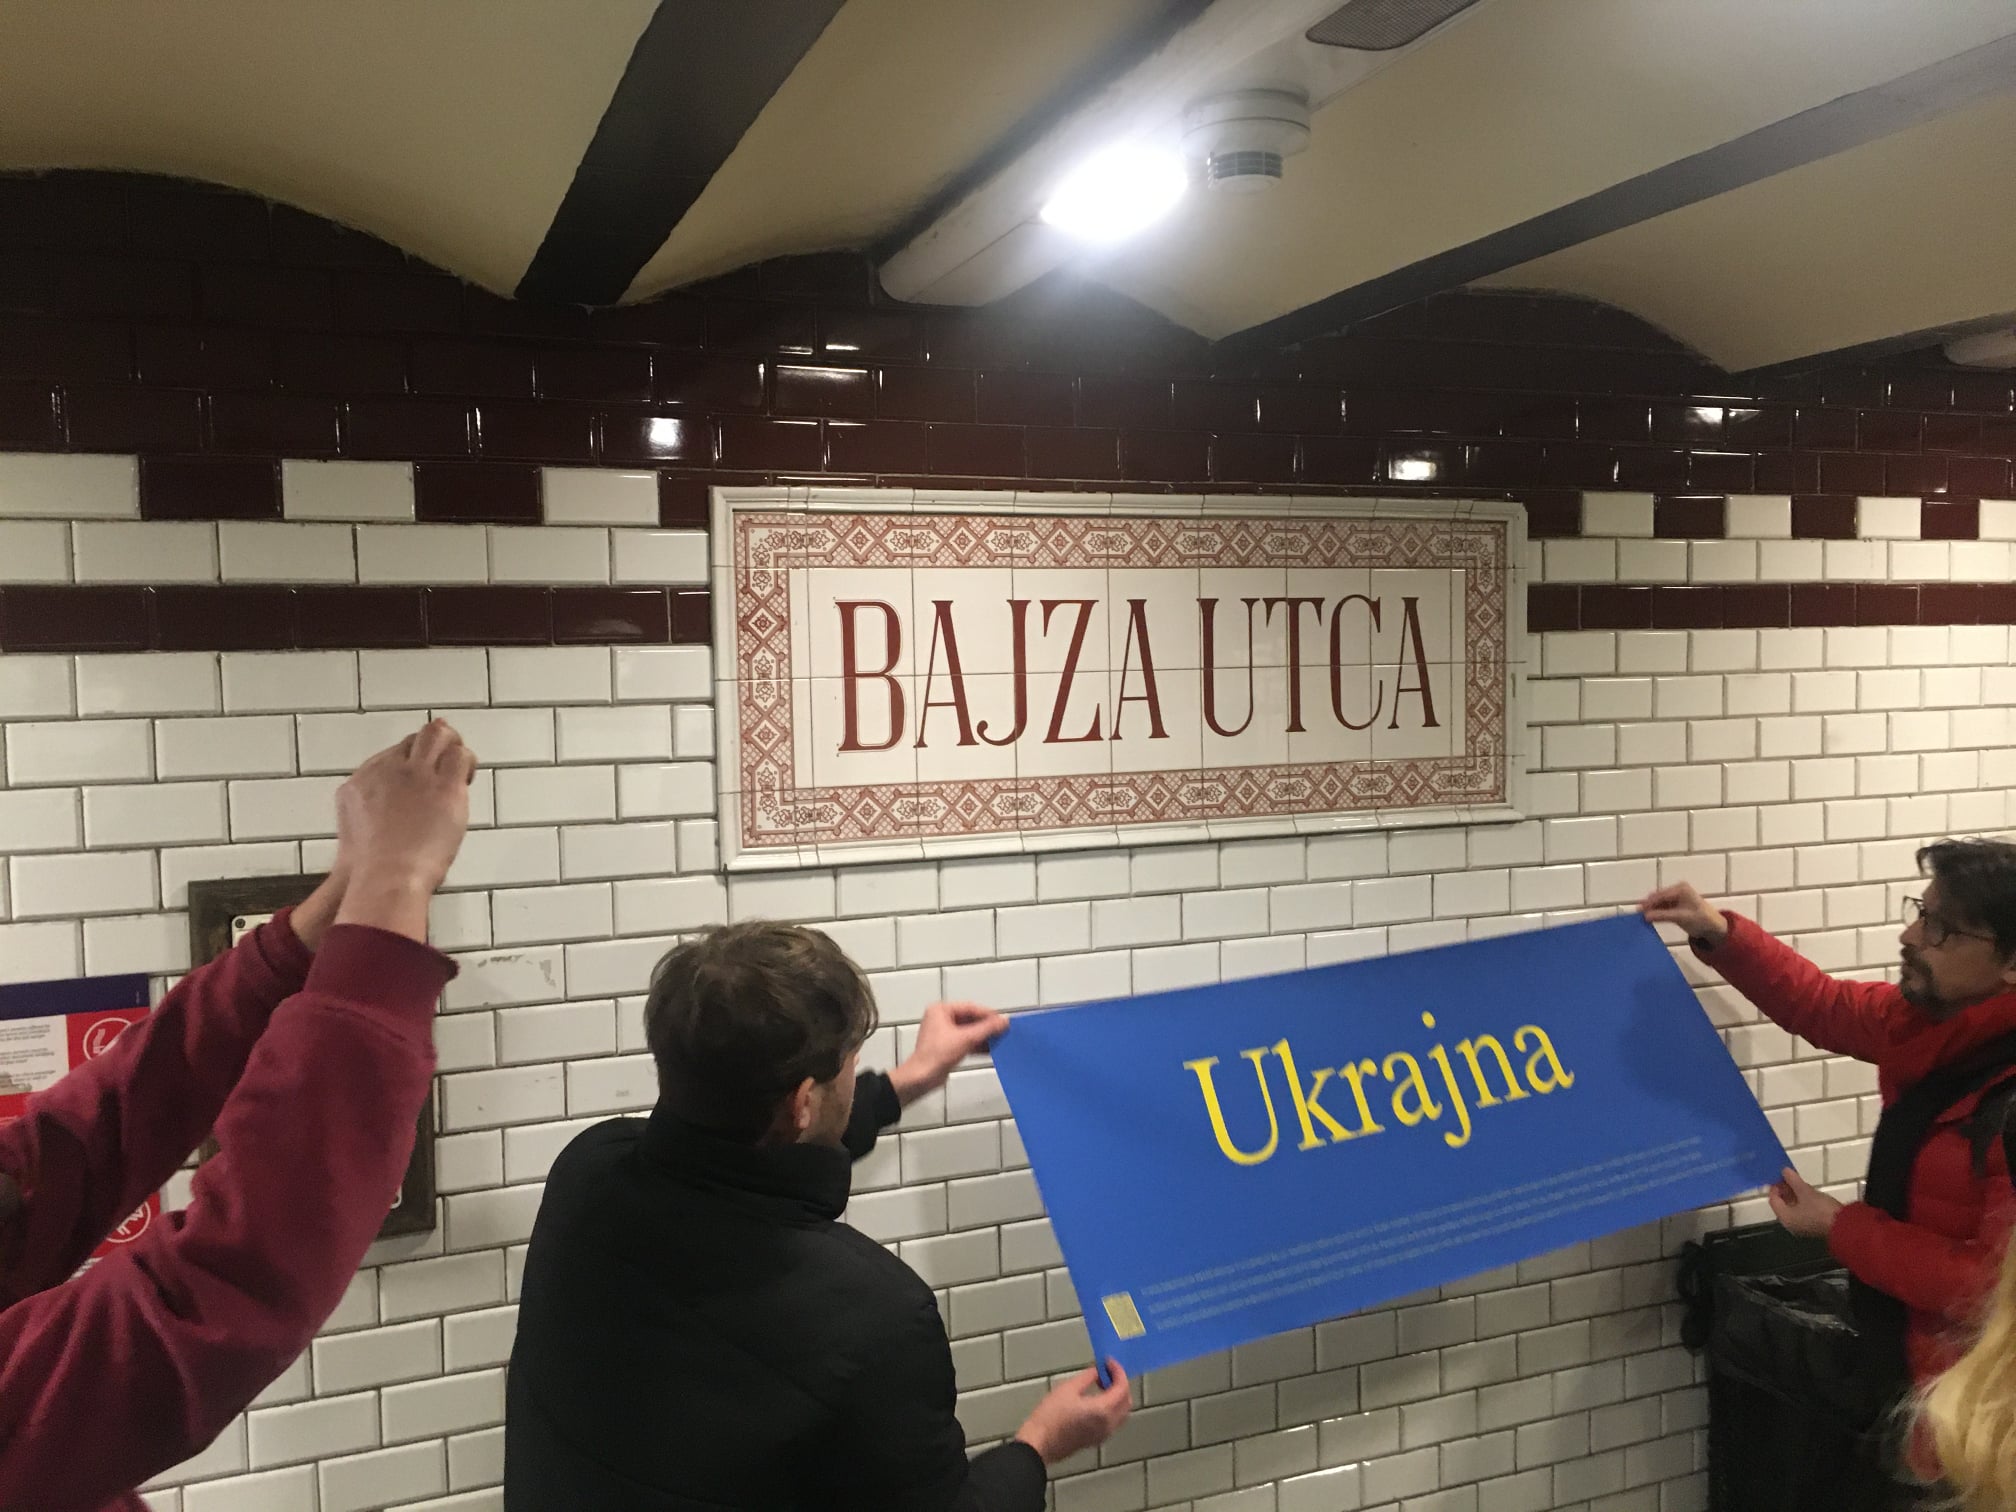 Artists Rename Metro Station Close to Russian Embassy in Support of Ukraine